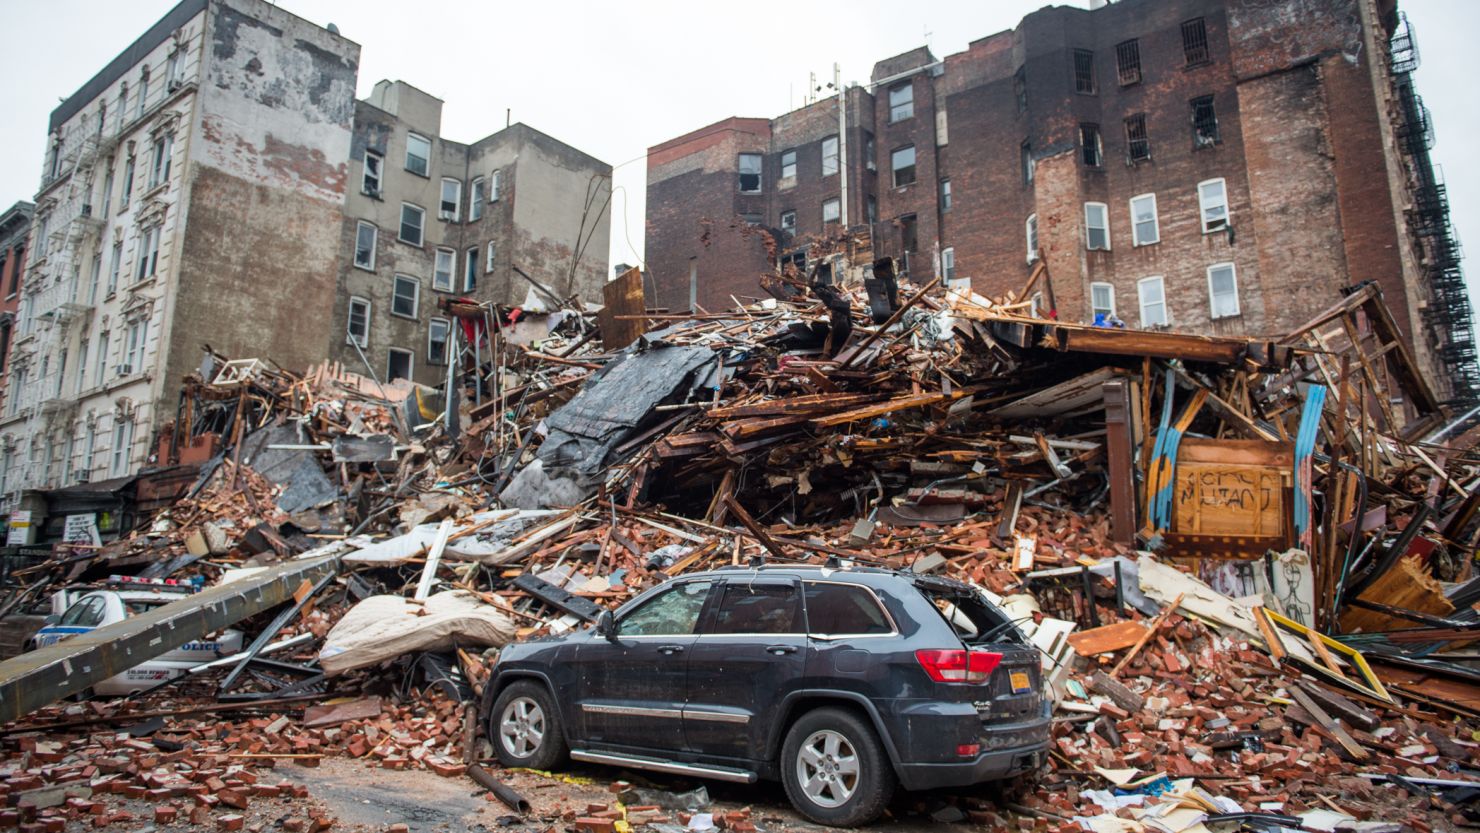 Boards and bricks litter the site after a gas explosion on March 26, 2015 destroyed buildings in New York's East Village.